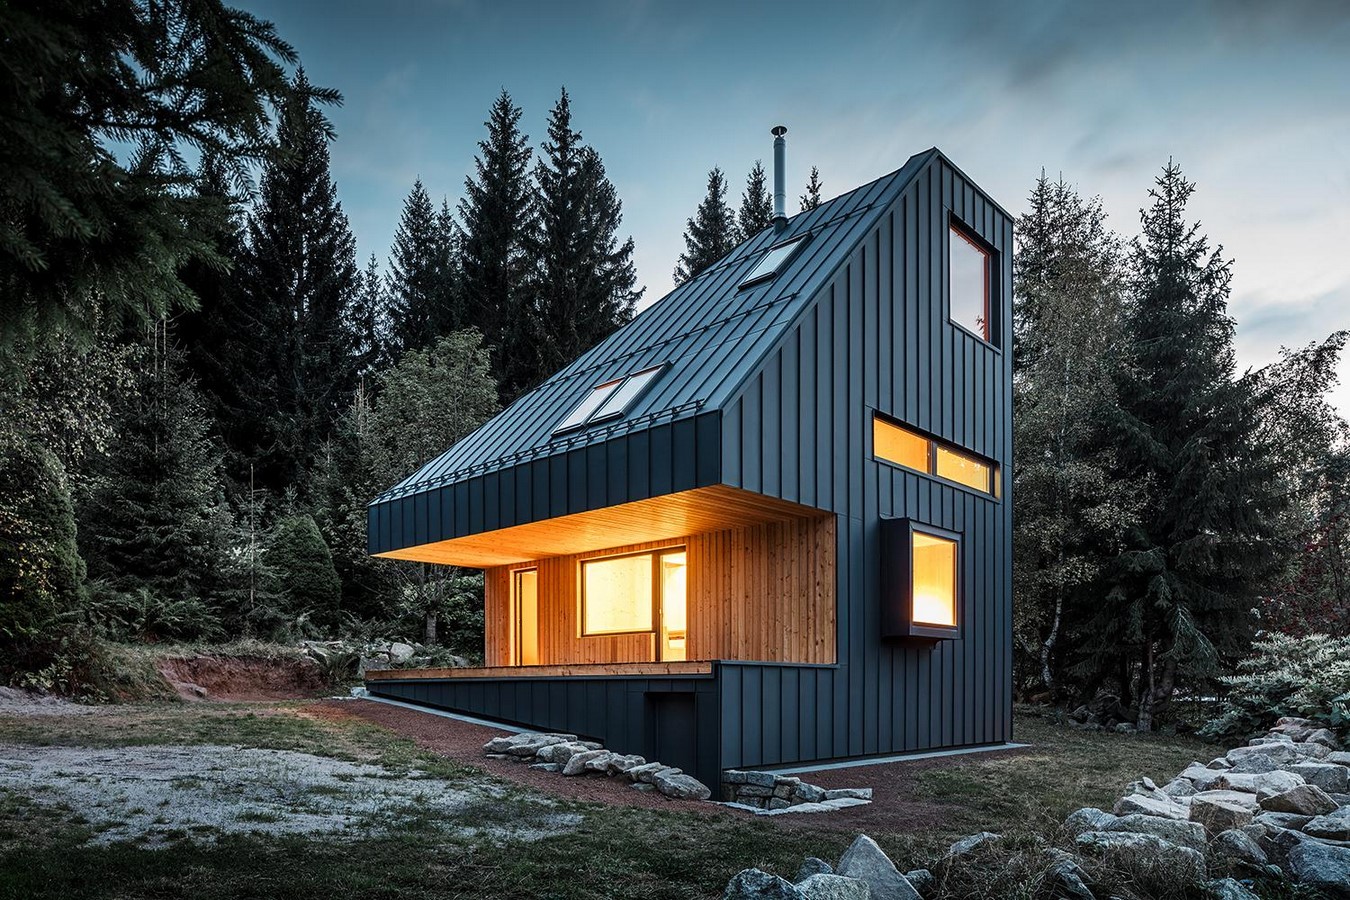 Architecture trends: Cabins - Sheet2